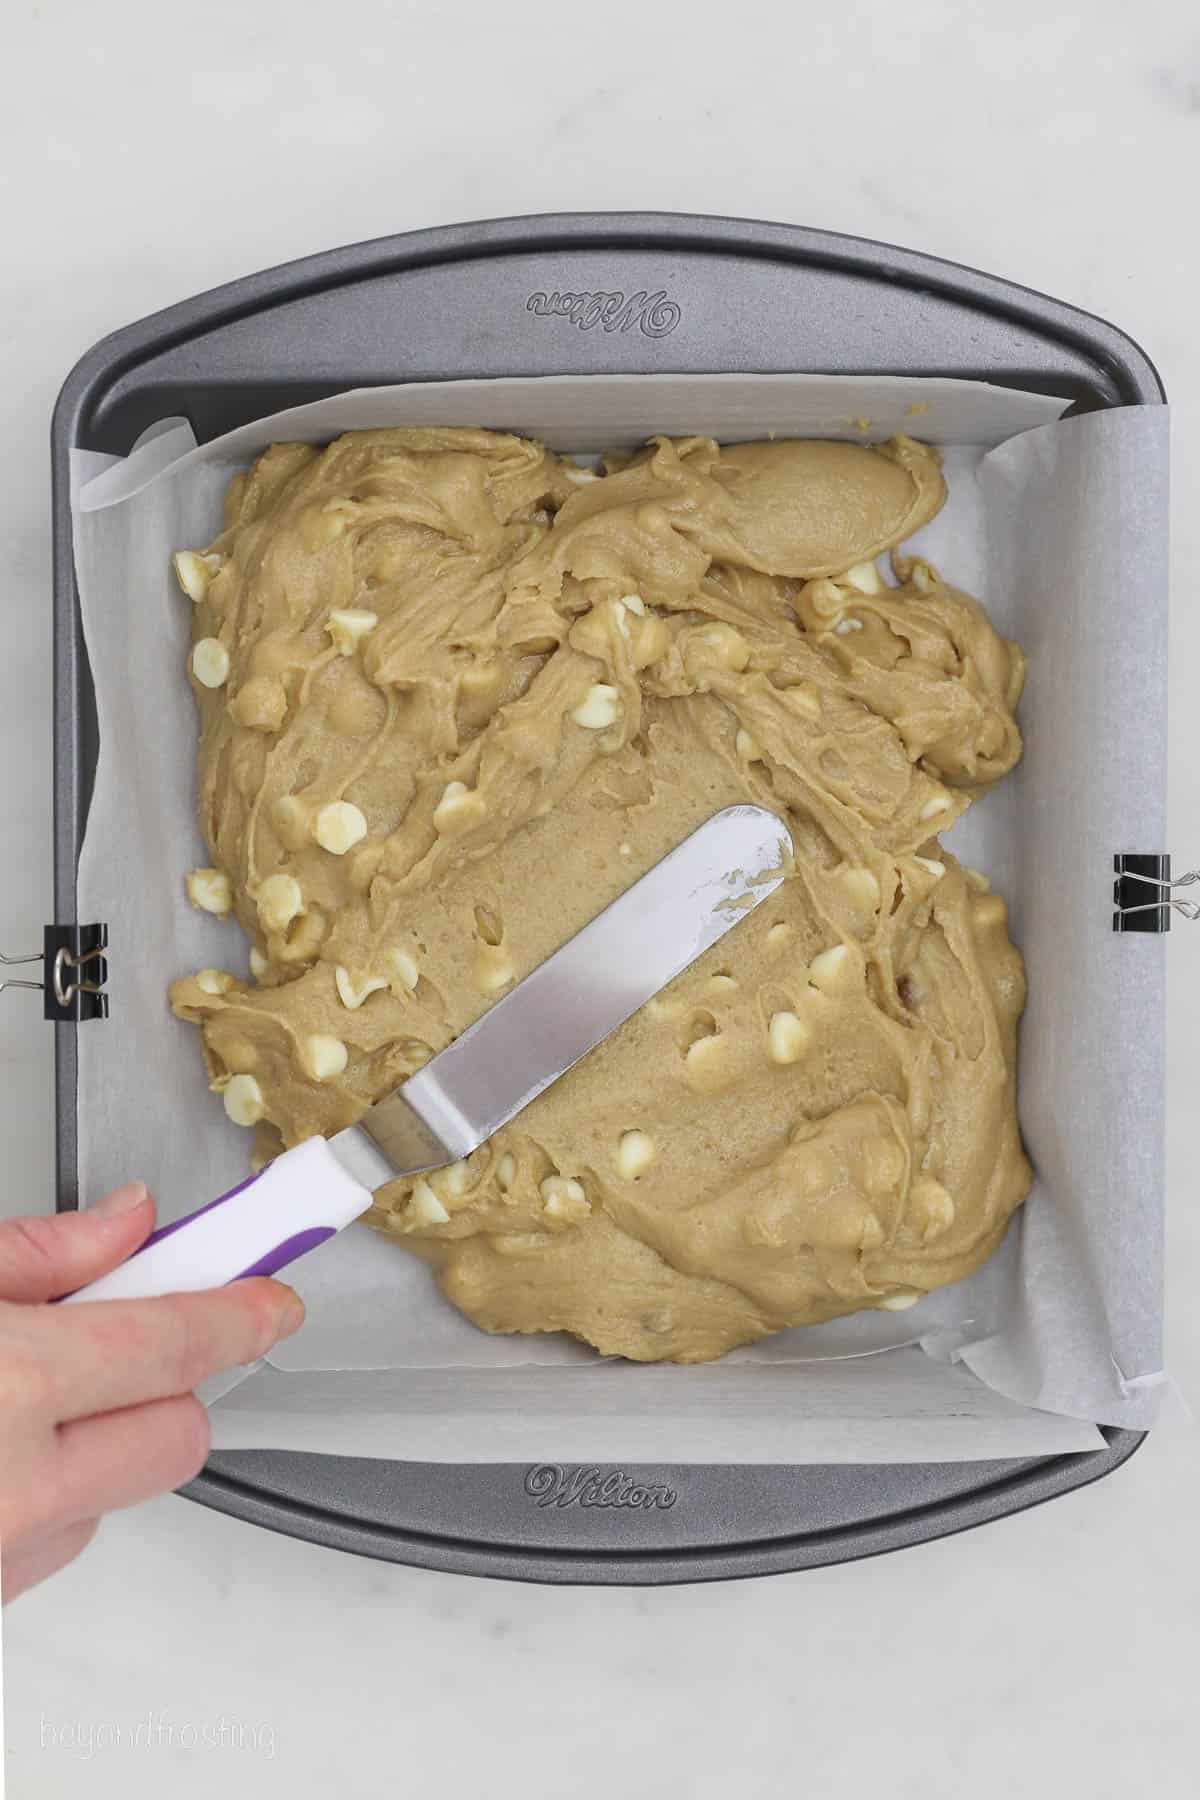 A hand uses a spatula to spread blondie batter into a square cake pan lined with parchment paper.